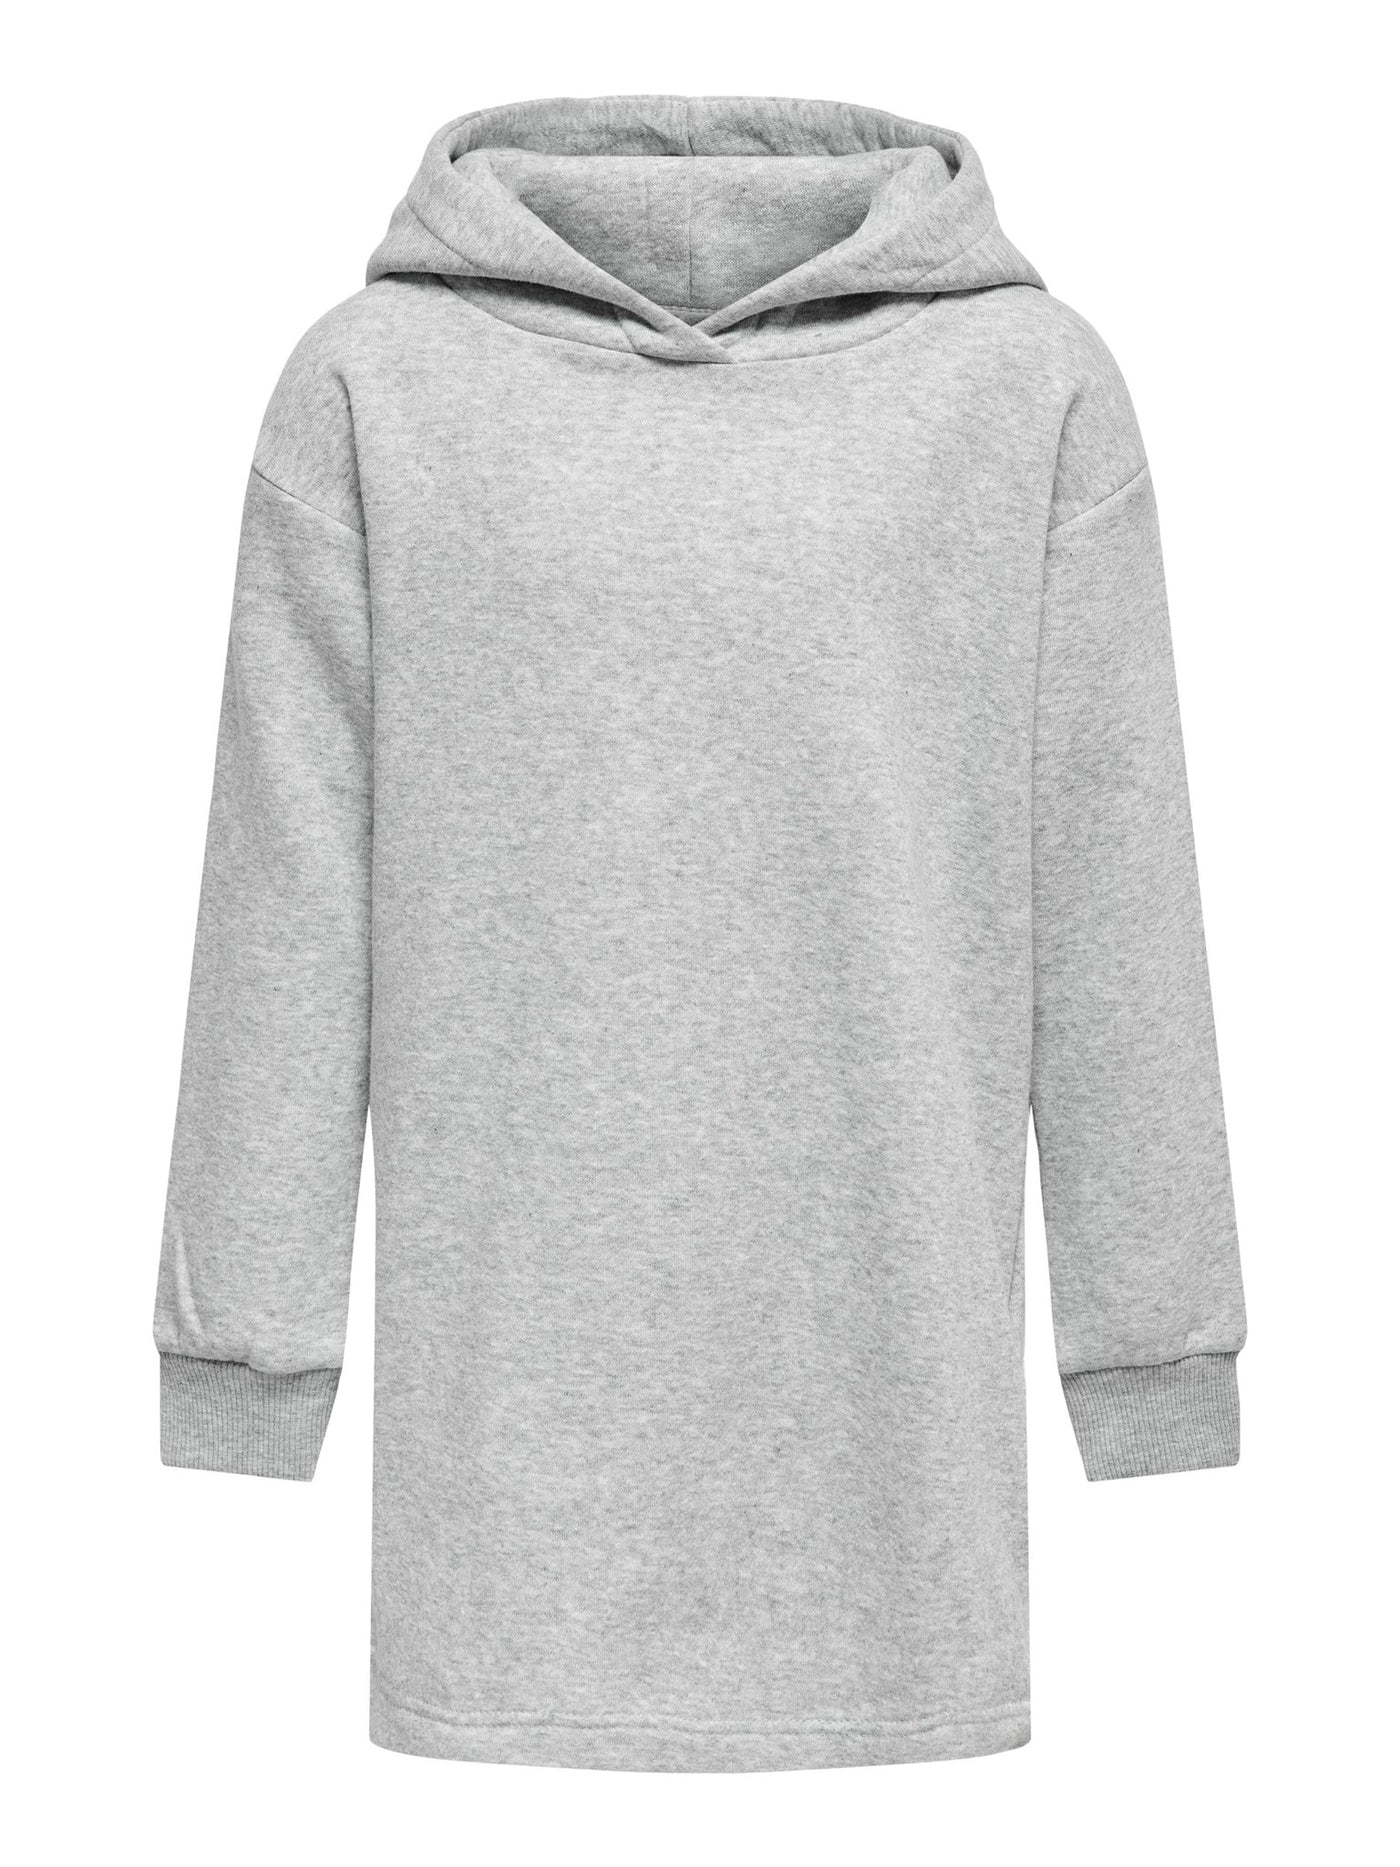 Every Life Hoodie Dress - Lysegrå - Kids Only